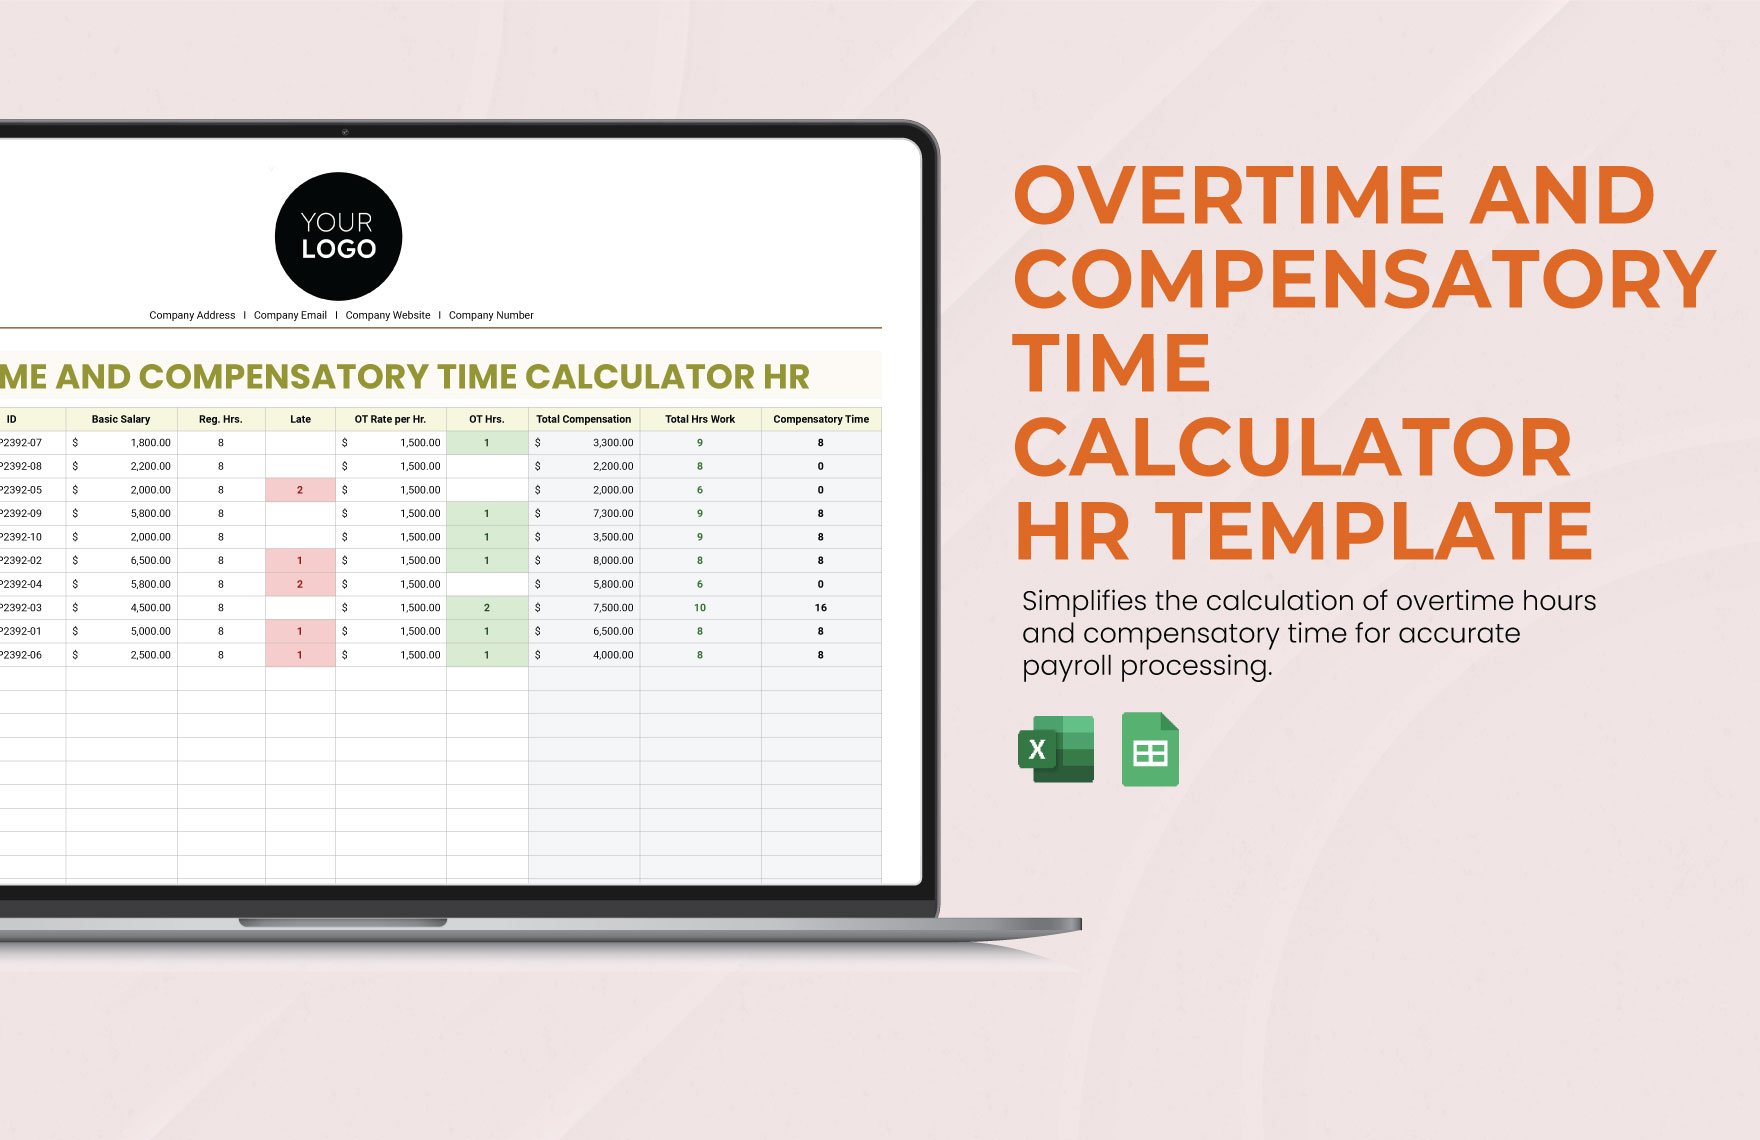 Overtime and Compensatory Time Calculator HR Template